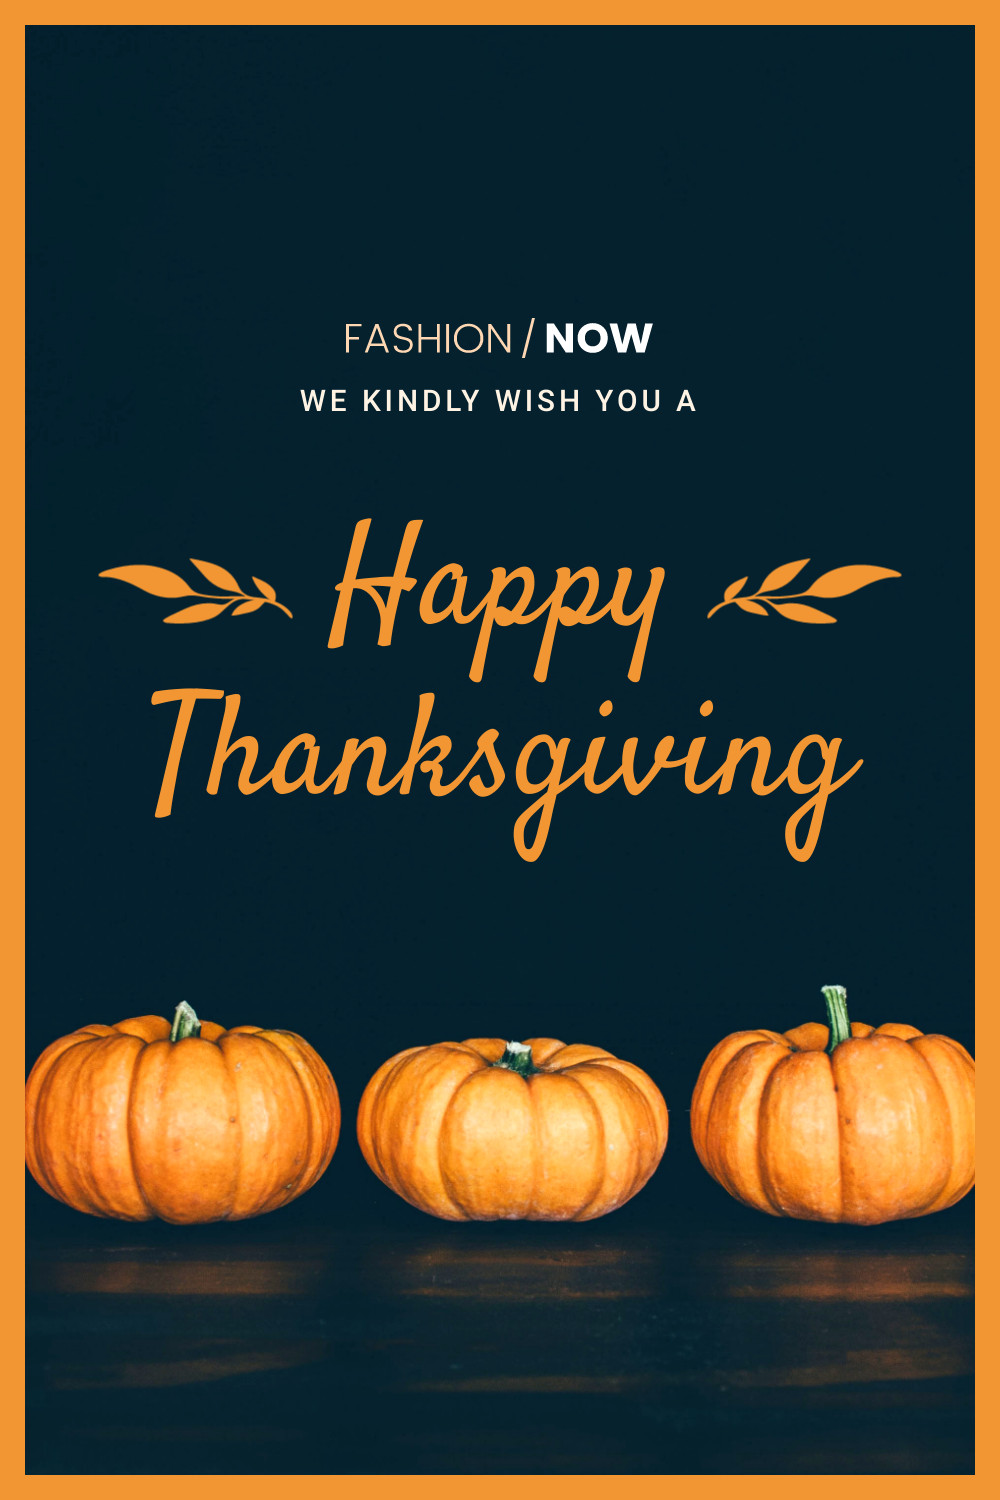 Kindly Wish You a Happy Thanksgiving Facebook Cover 820x360